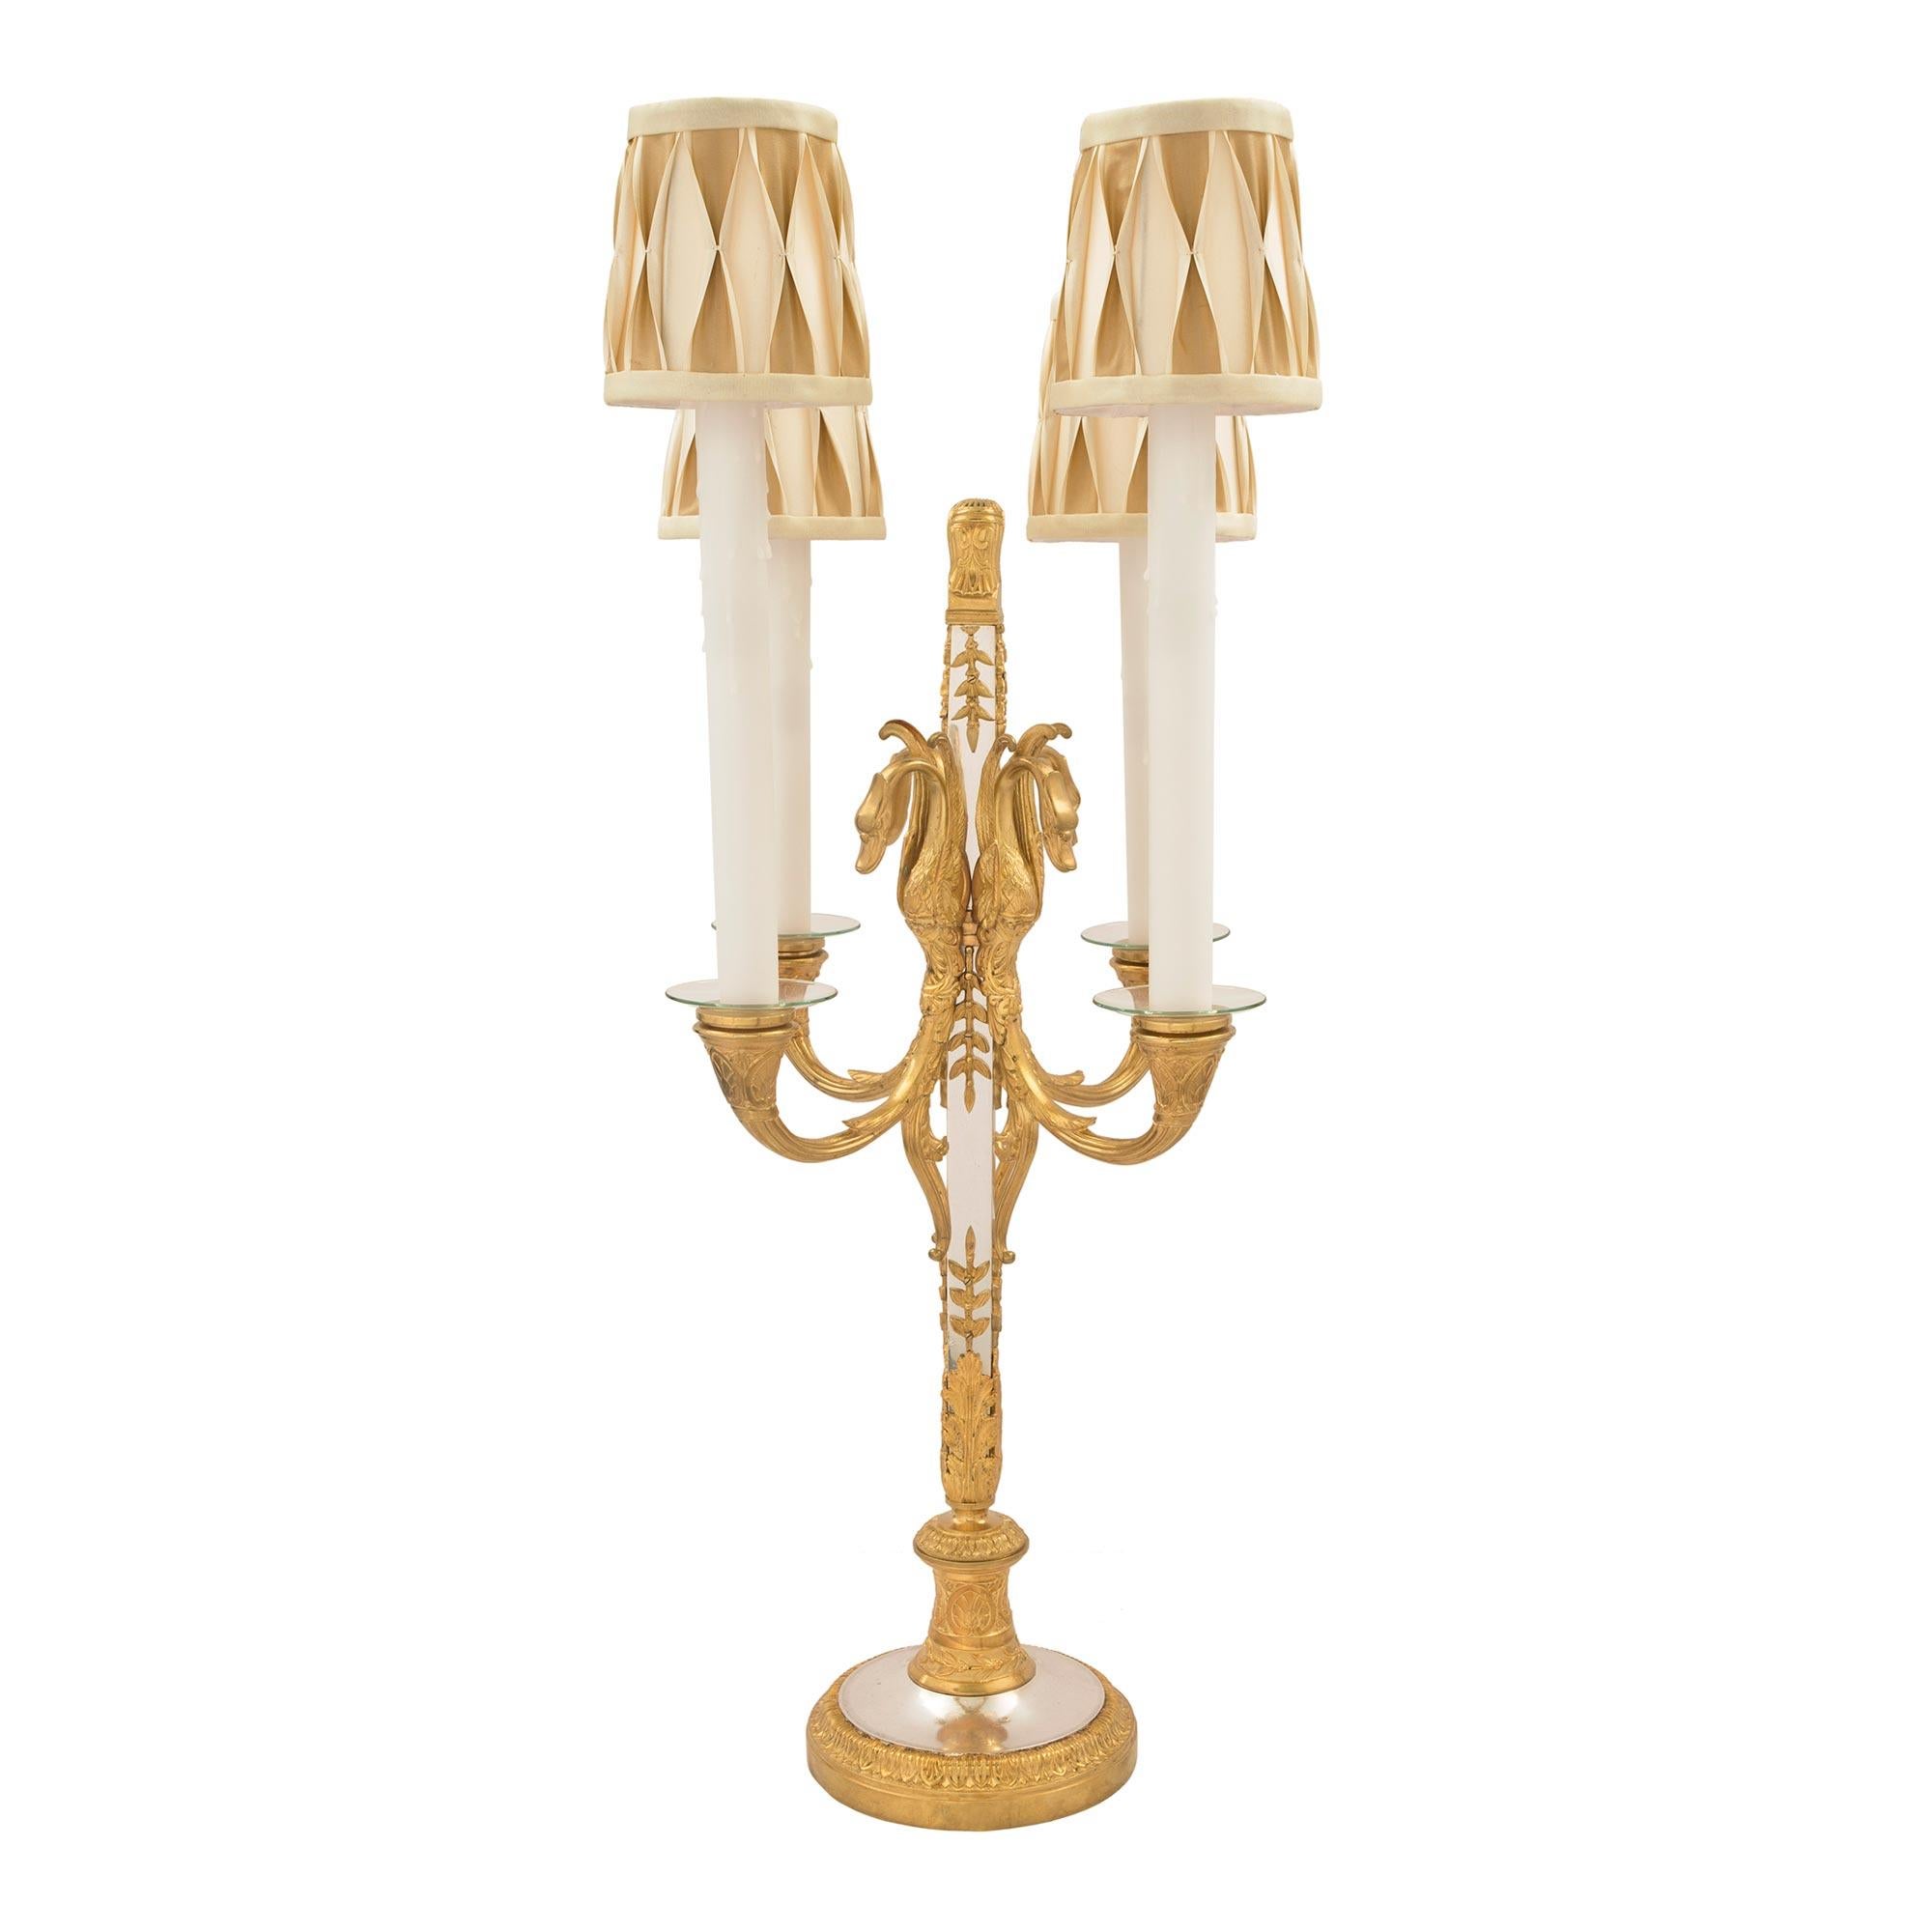 Silvered Pair of French Mid 19th Century Neo-Classical St. Candelabra Lamps For Sale